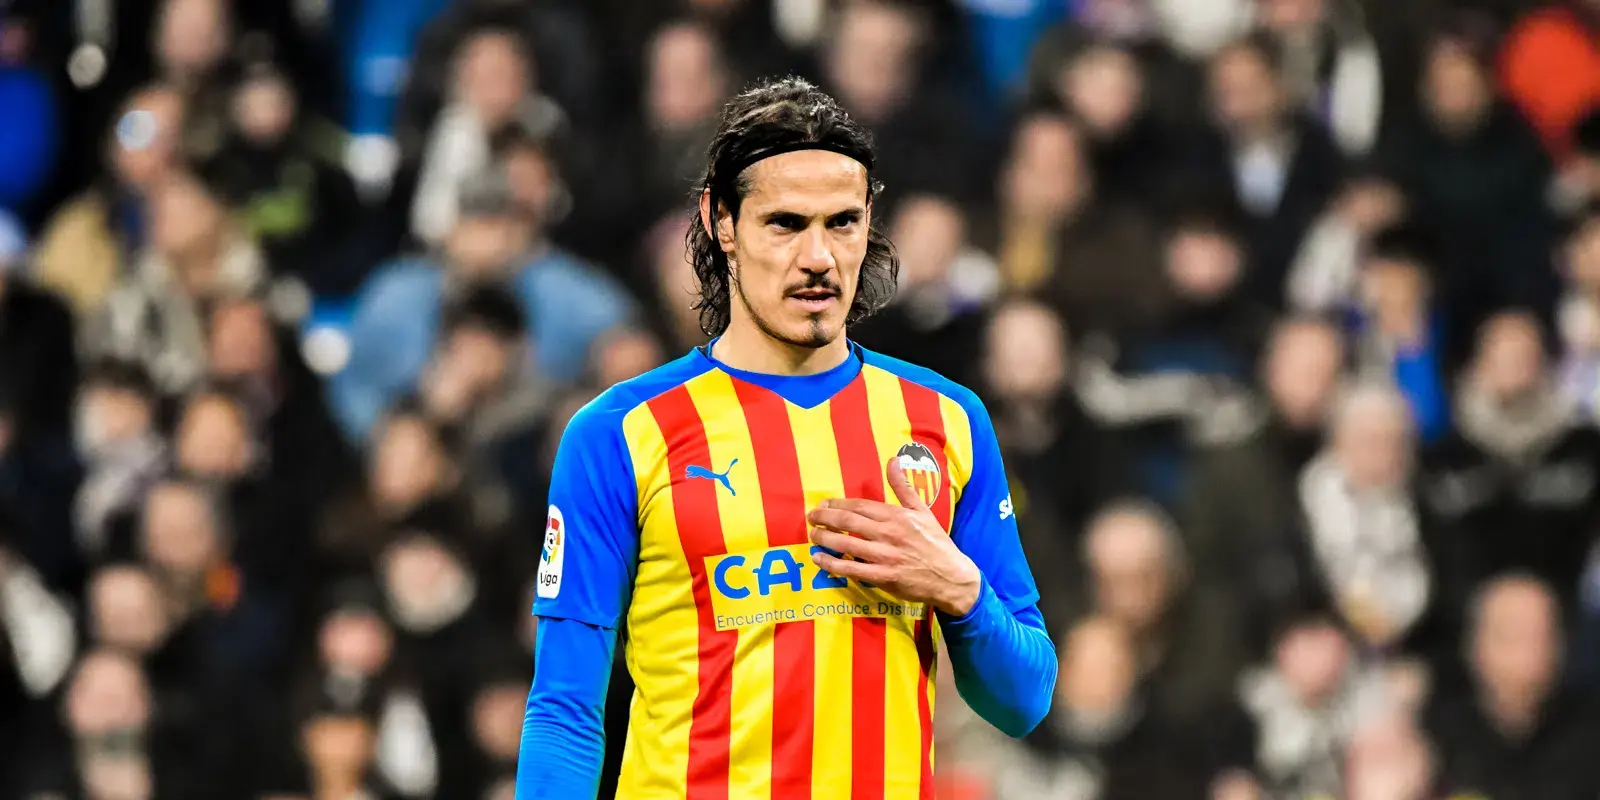 Advanced steps at Valencia CF to relieve Cavani: principle of agreement
	
